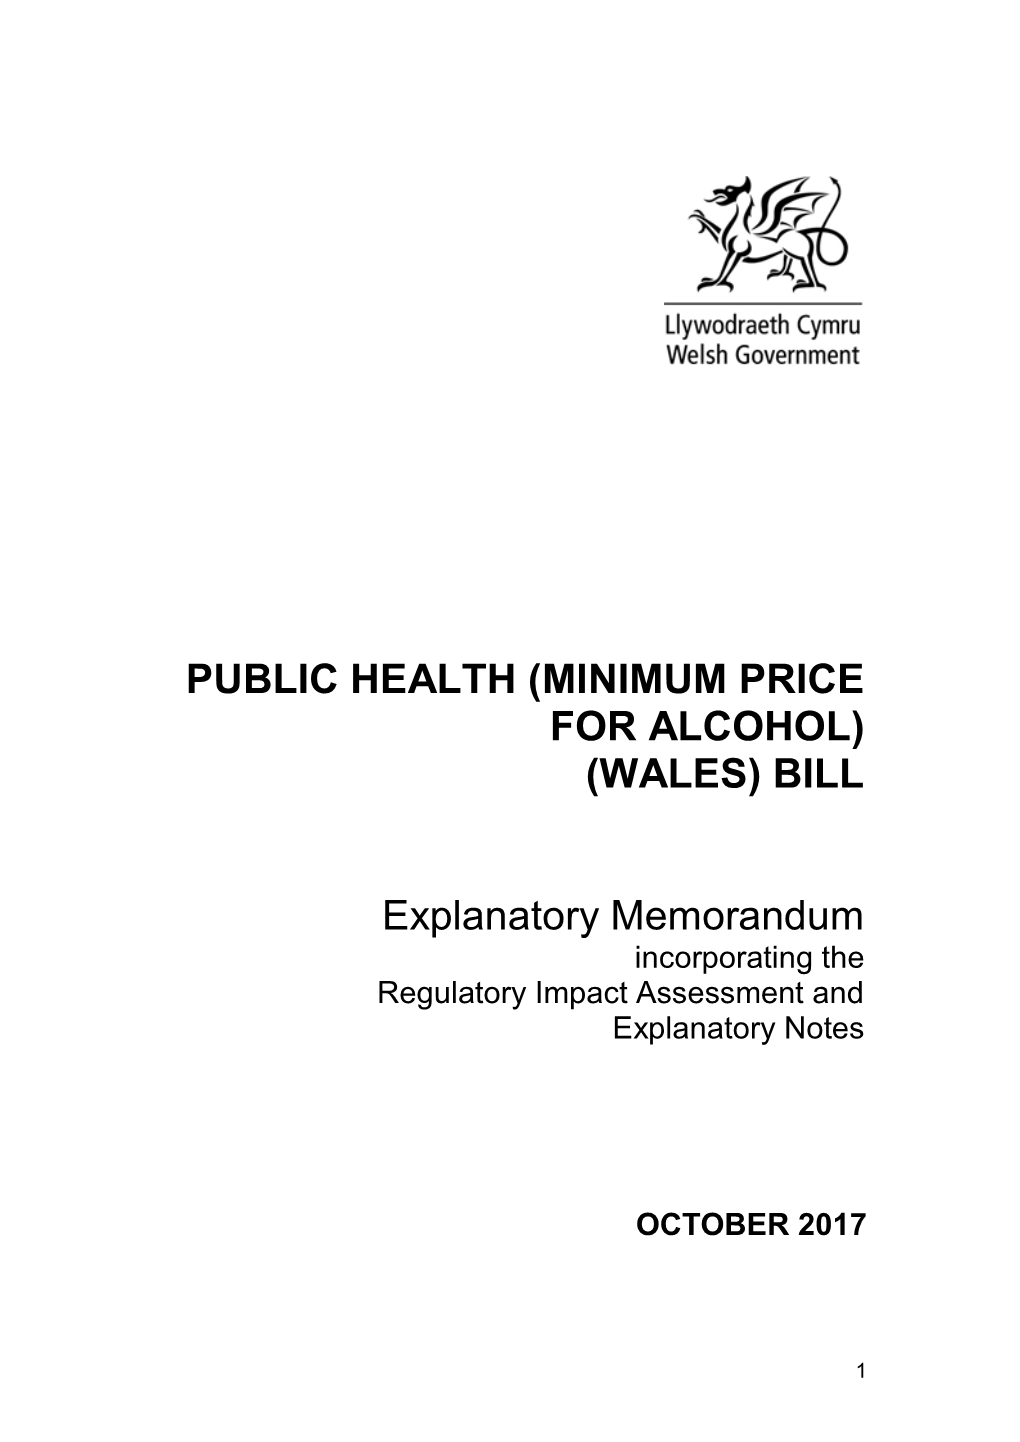 Public Health (Minimum Price for Alcohol) (Wales) Bill